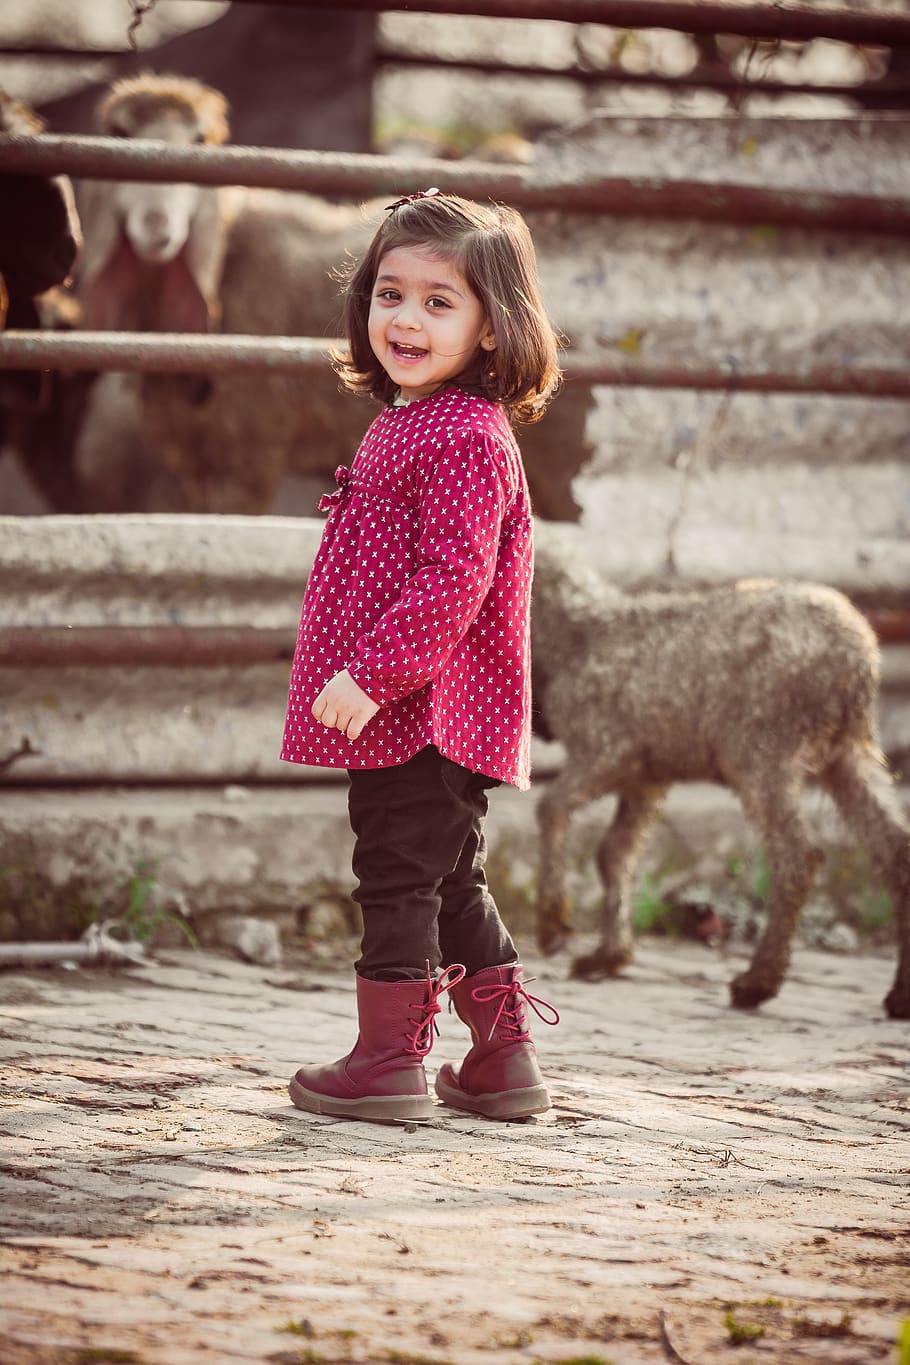 kids, farm, fields, child, cute, nature, family, girl, young, little